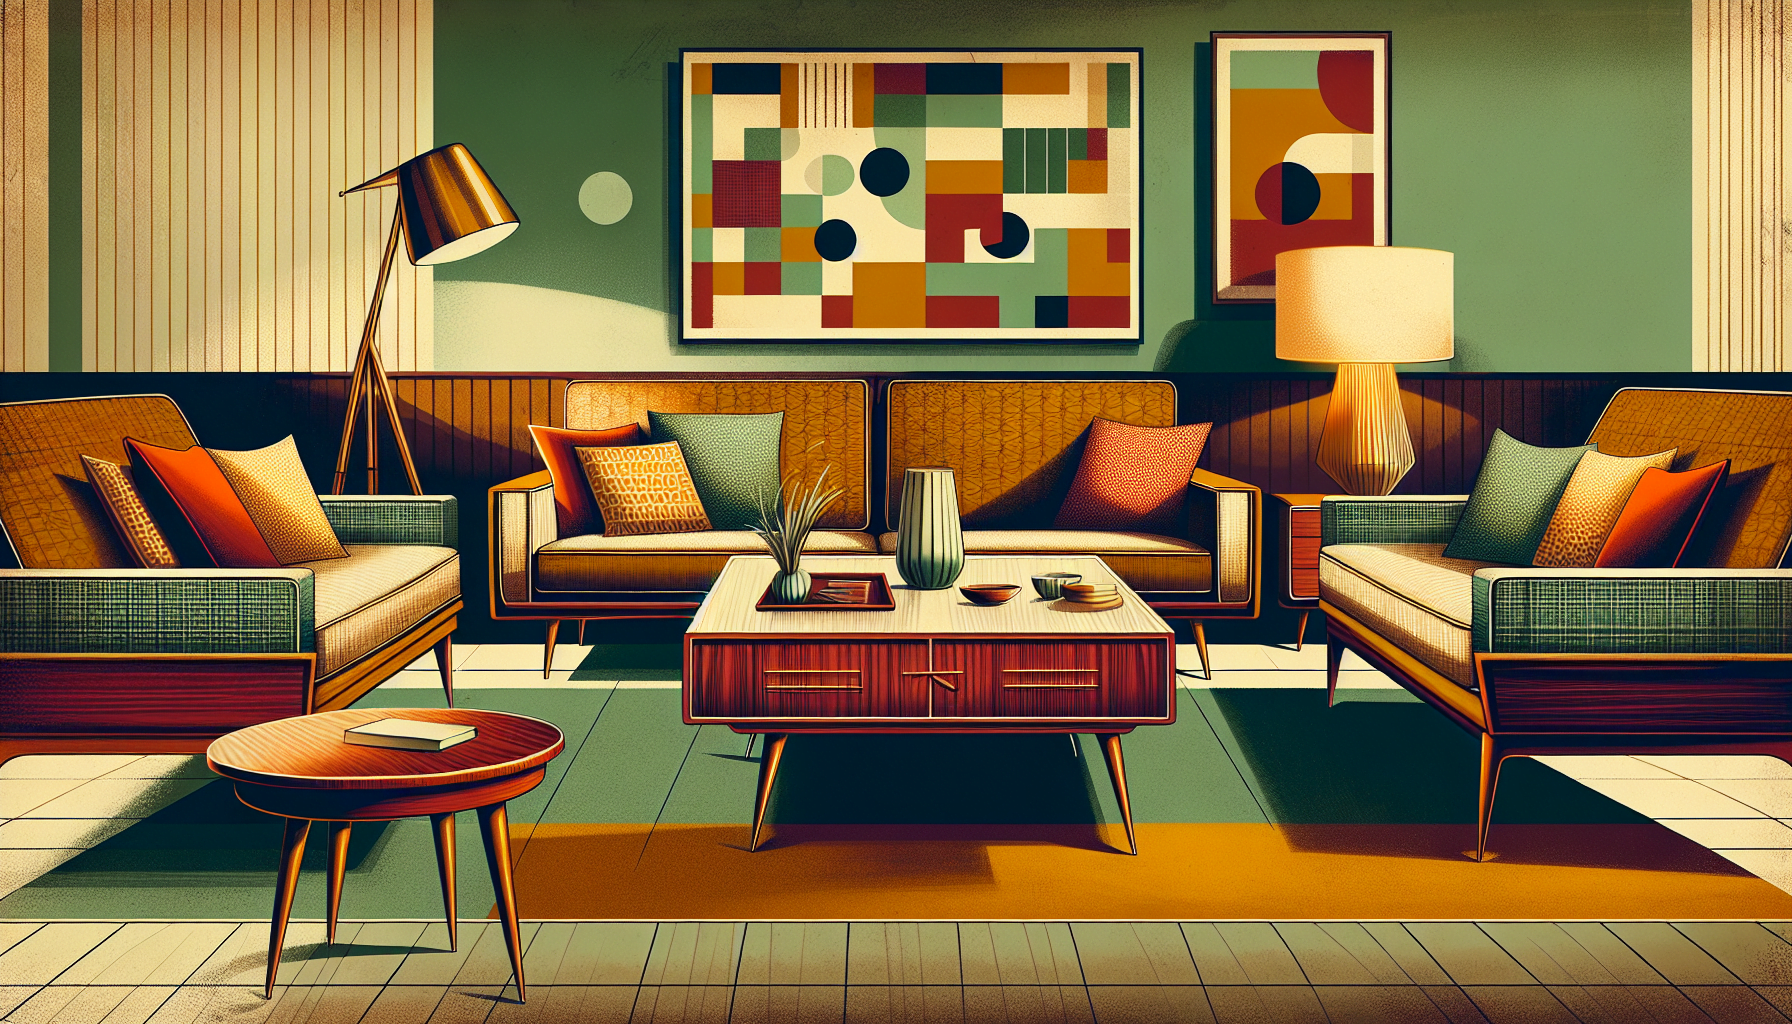 A colorful illustration of a retro living room with mid century modern furniture and vintage decor